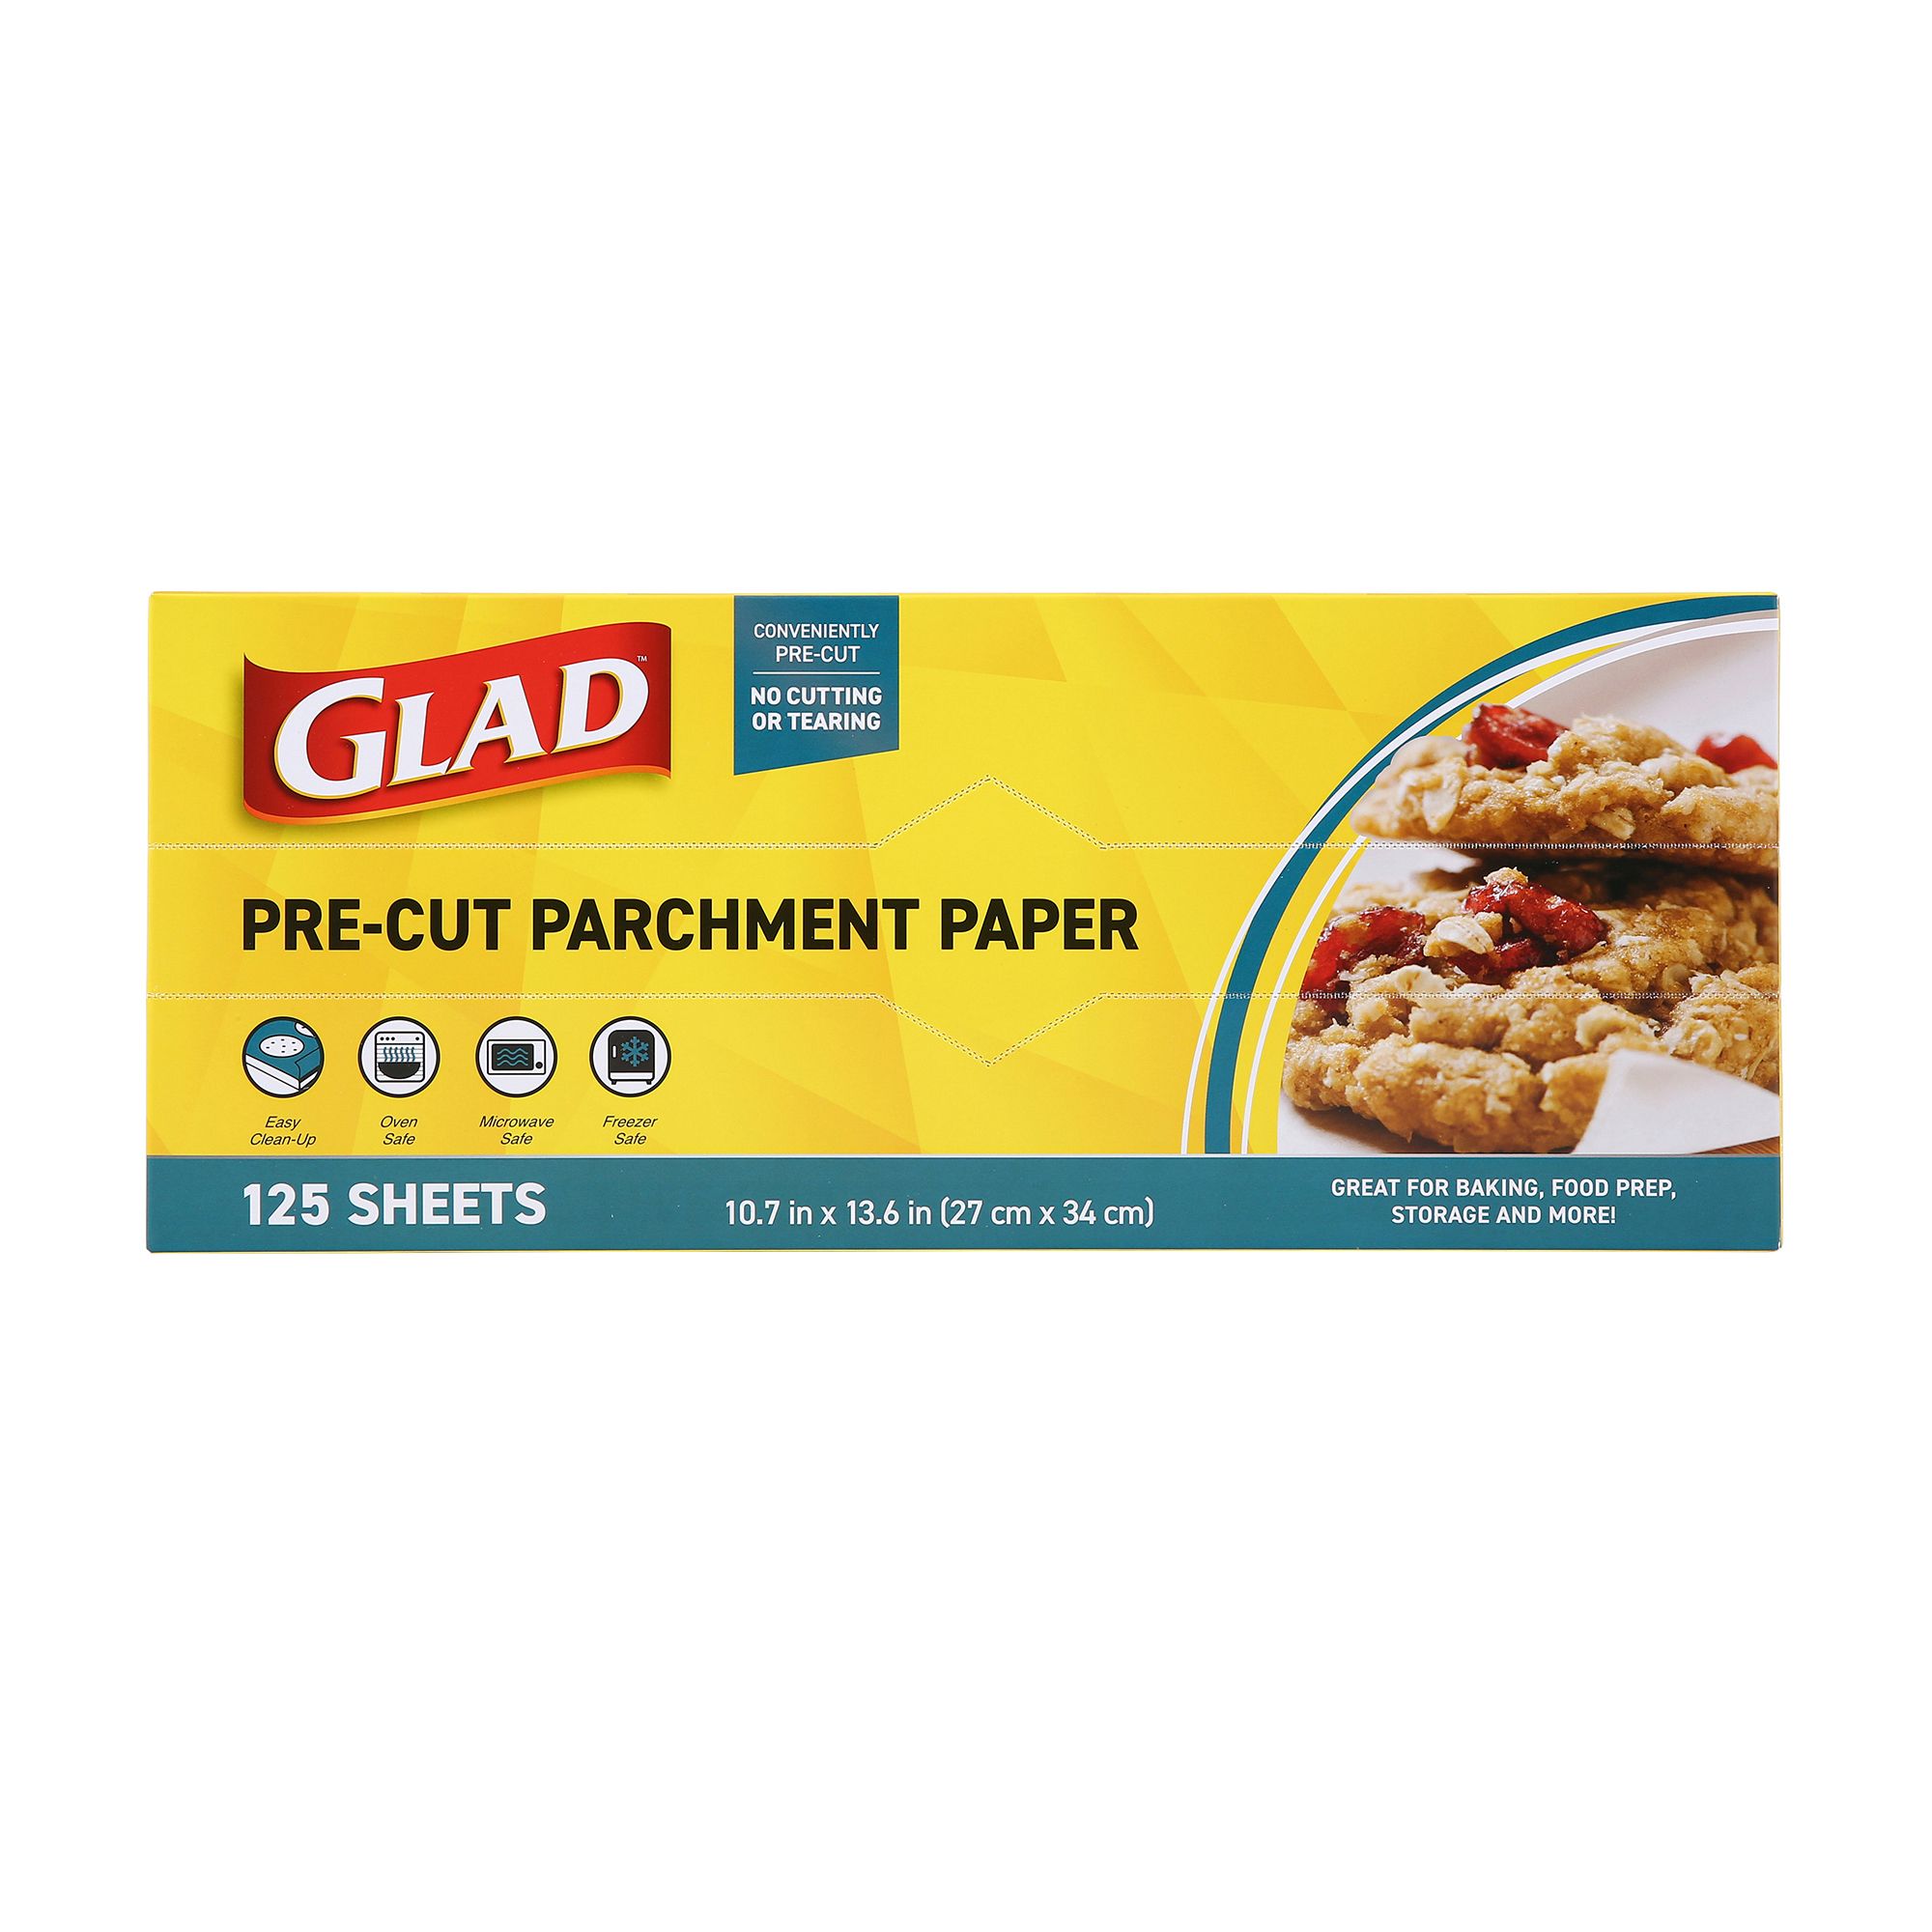 Glad Pre-Cut Parchment Paper for Baking | Pre-Cut Baking Paper, White  Parchment Paper for Baking, Food Prep, Food Storage, and Everyday Use | 25  Count